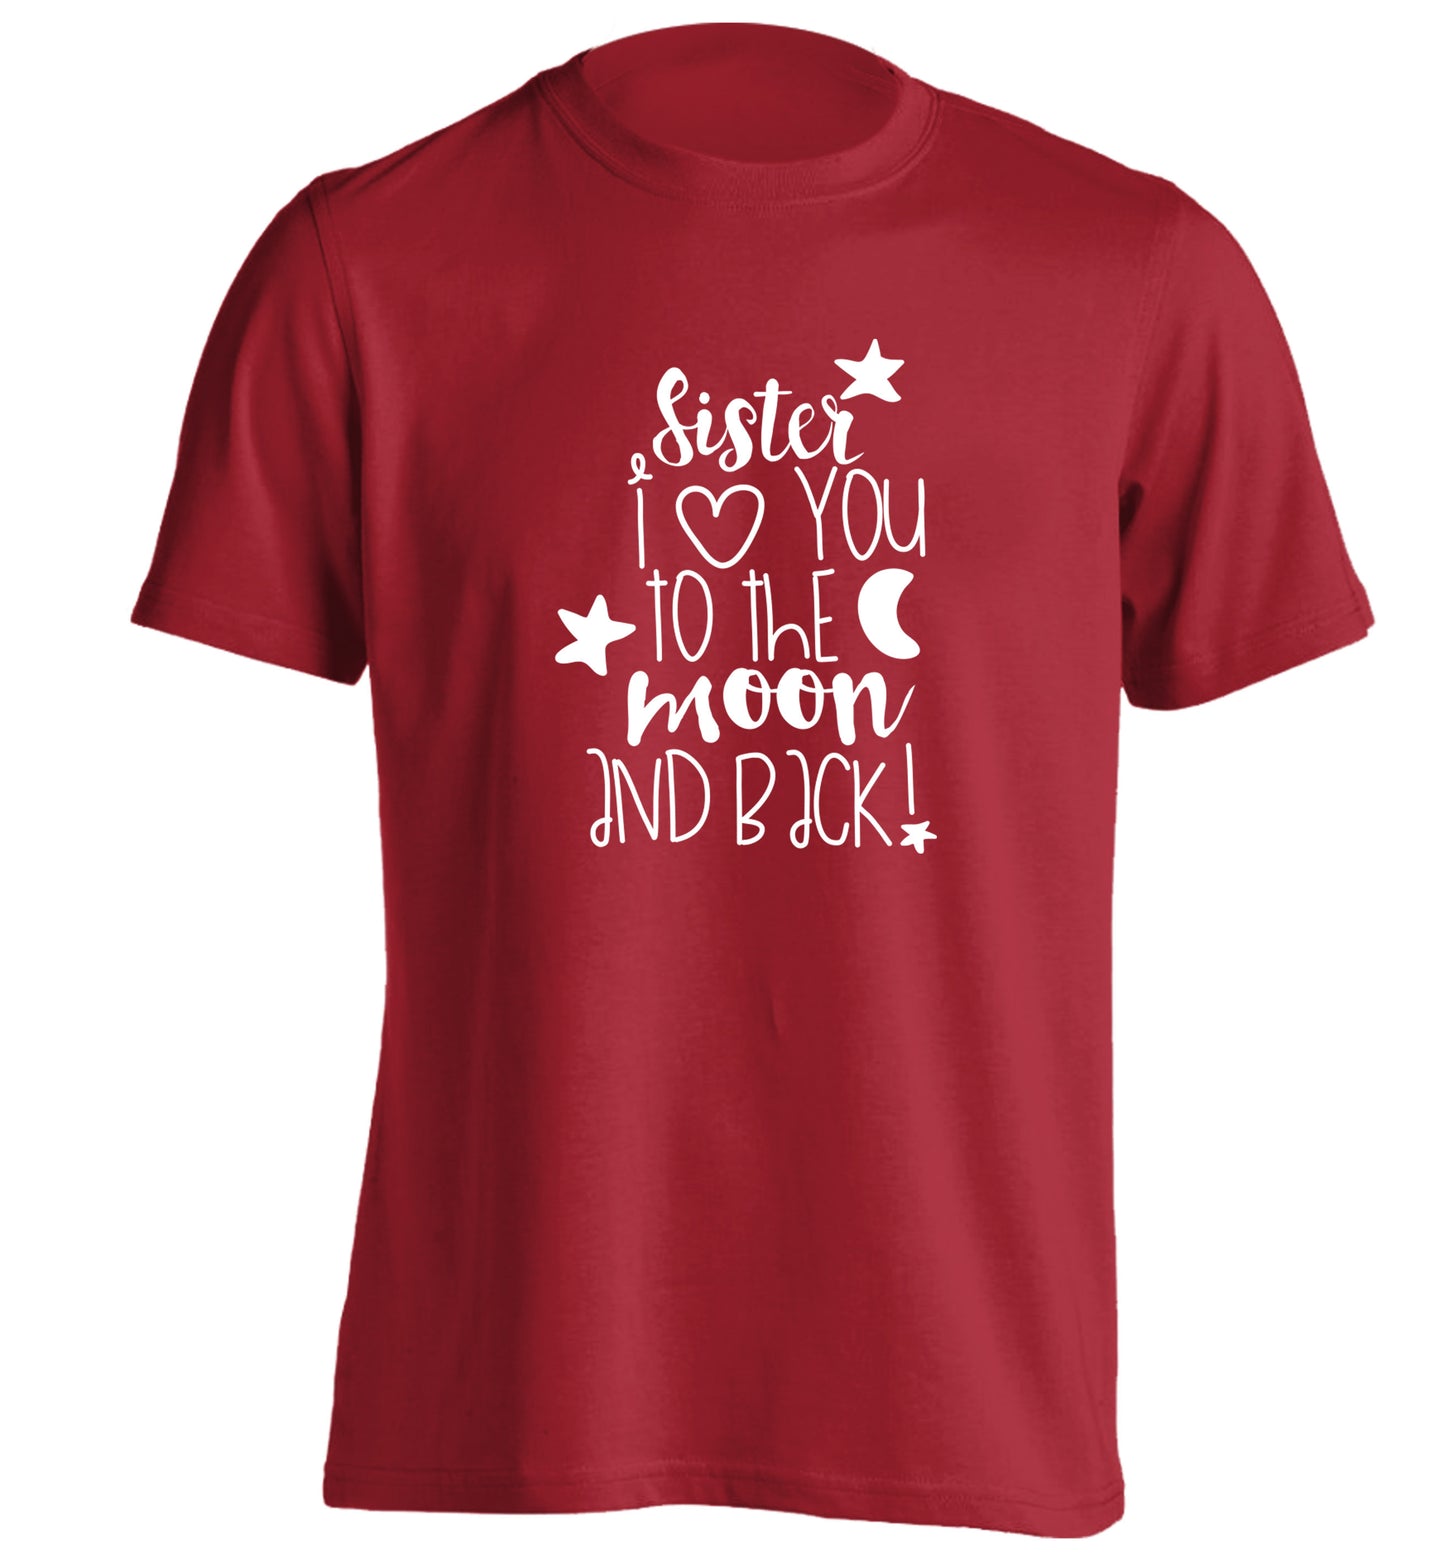 Sister I love you to the moon and back adults unisex red Tshirt 2XL